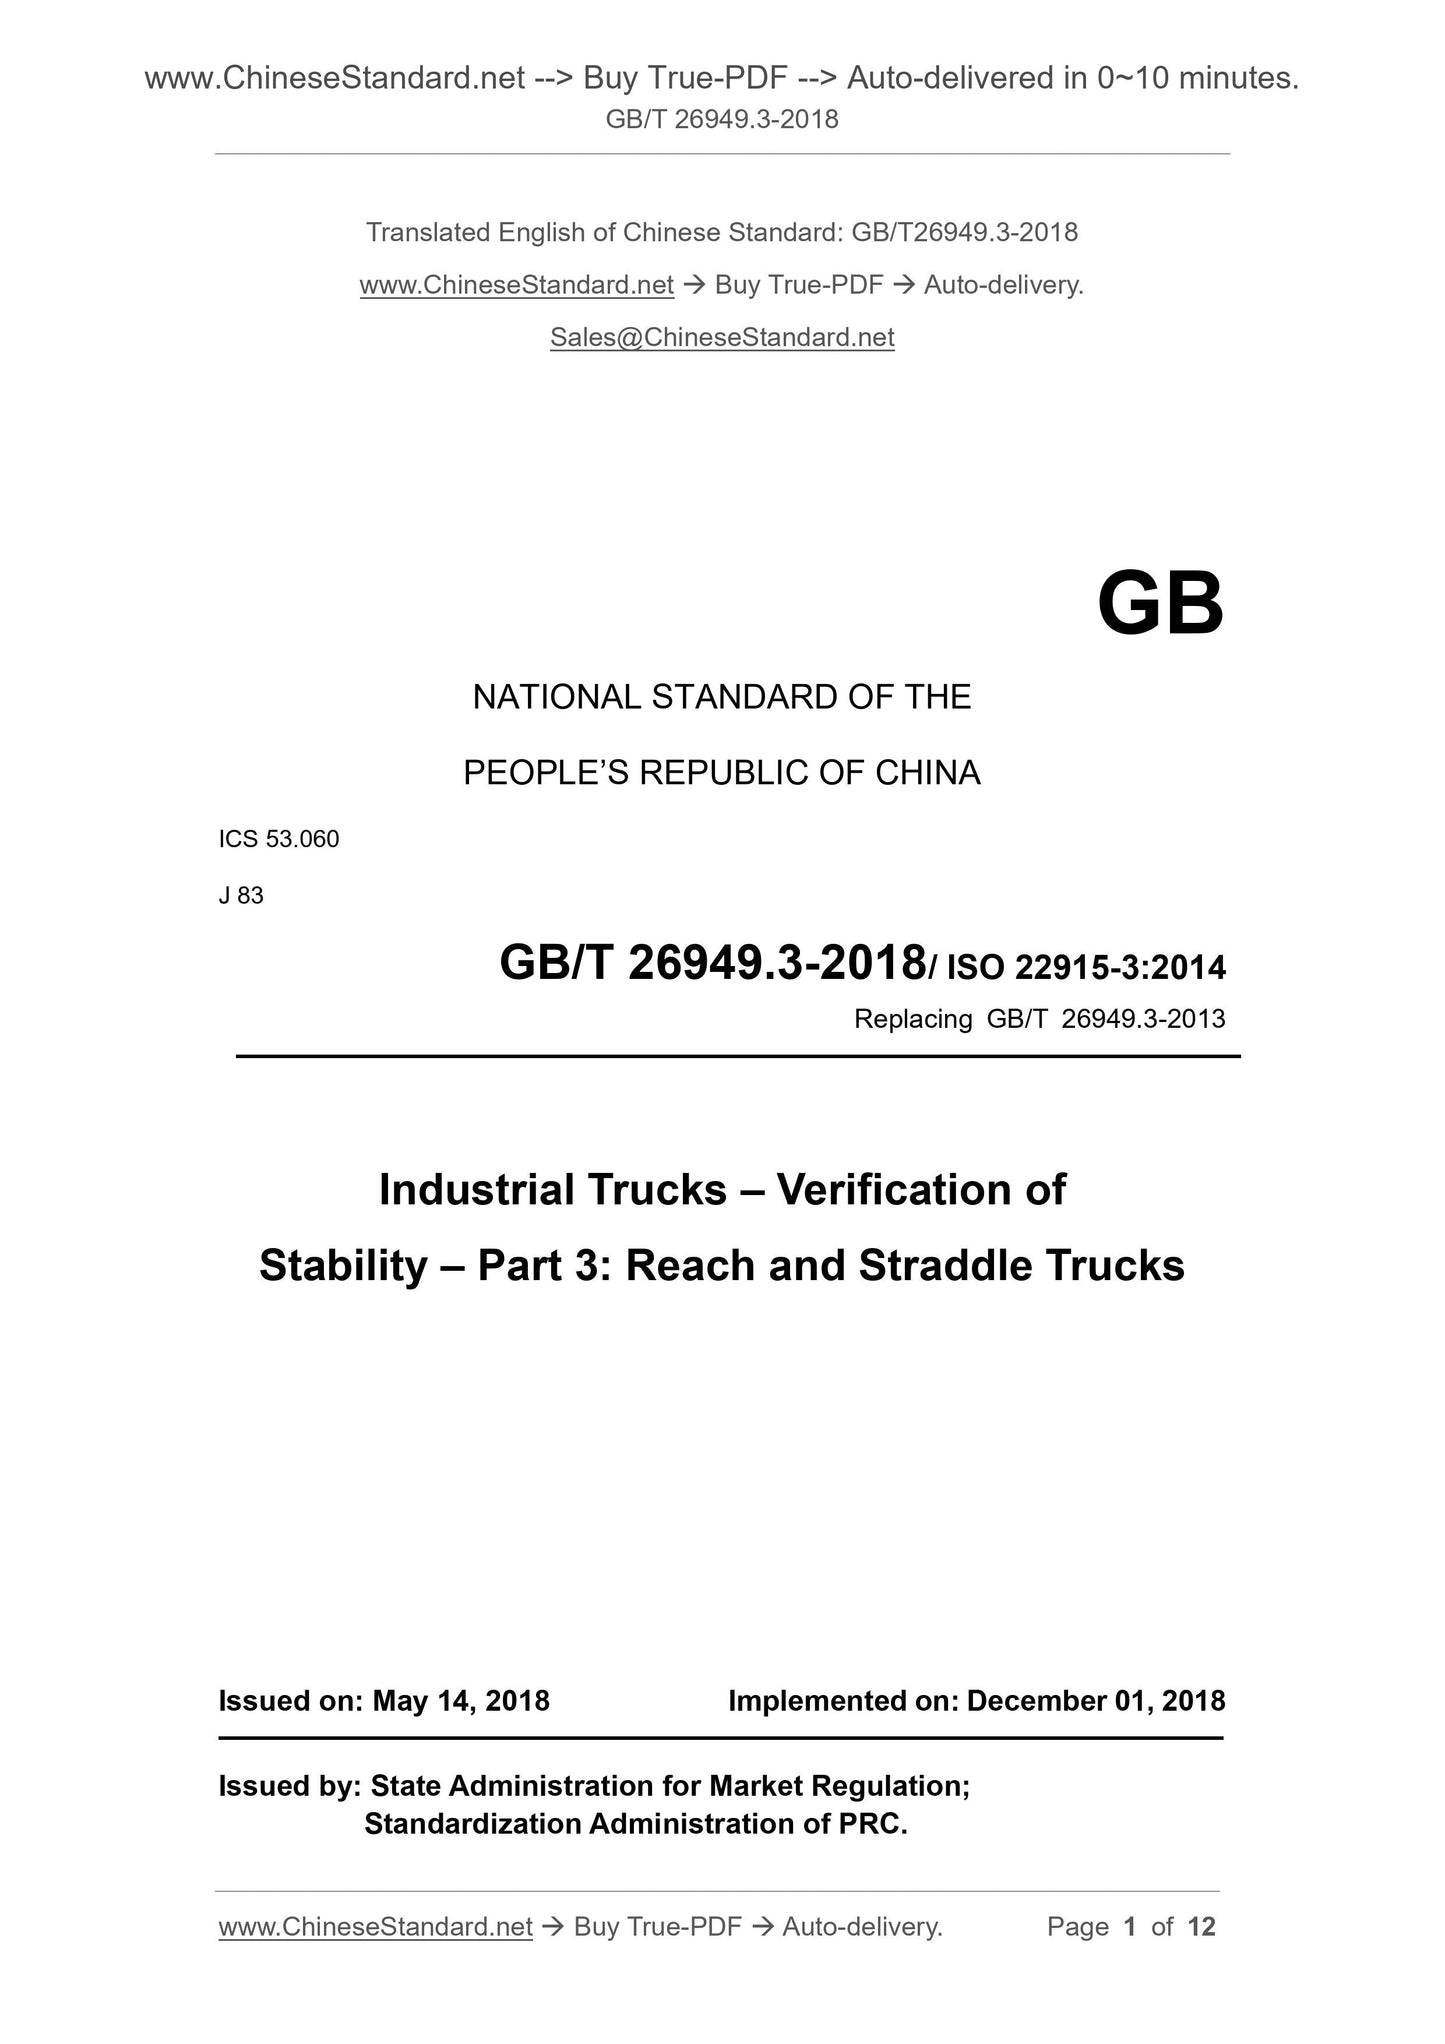 GB/T 26949.3-2018 Page 1